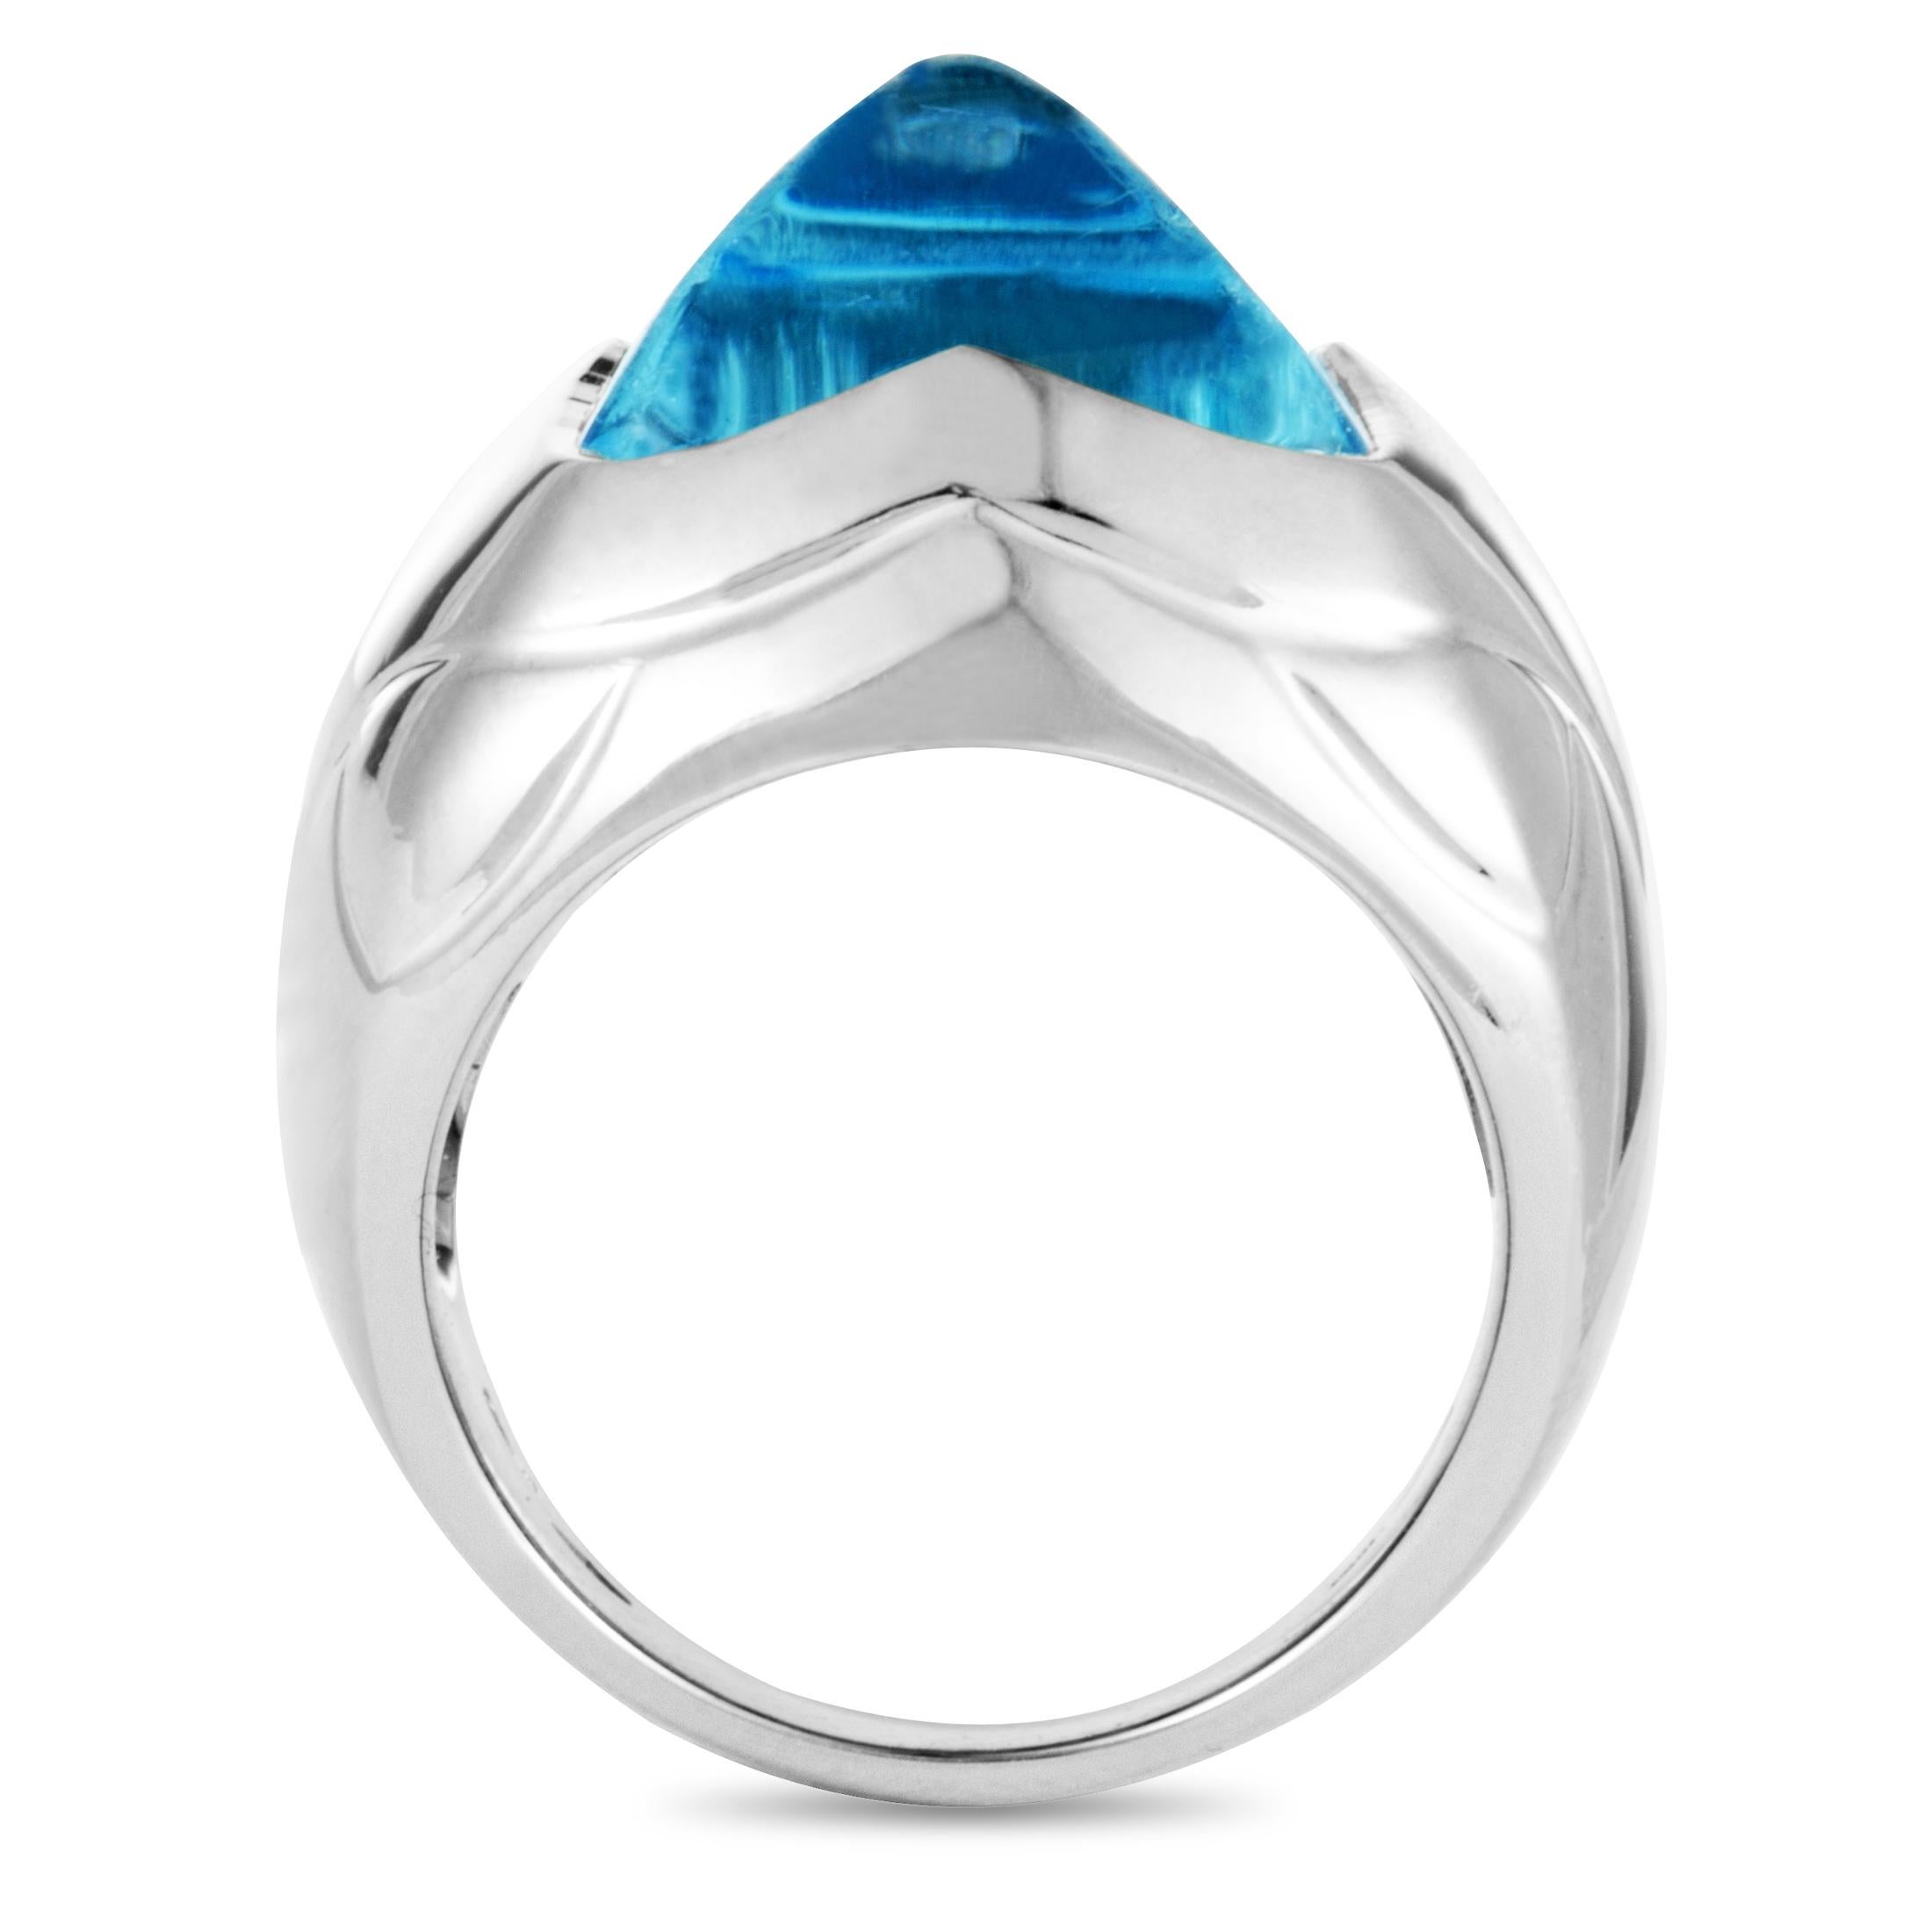 The mystical allure of the delightful topaz is splendidly elevated by the elegant sheen of 18K white gold in this wonderful ring from Bvlgari that boasts an incredibly attractive appeal.
 Ring Top Dimensions: 13mm x 13mm